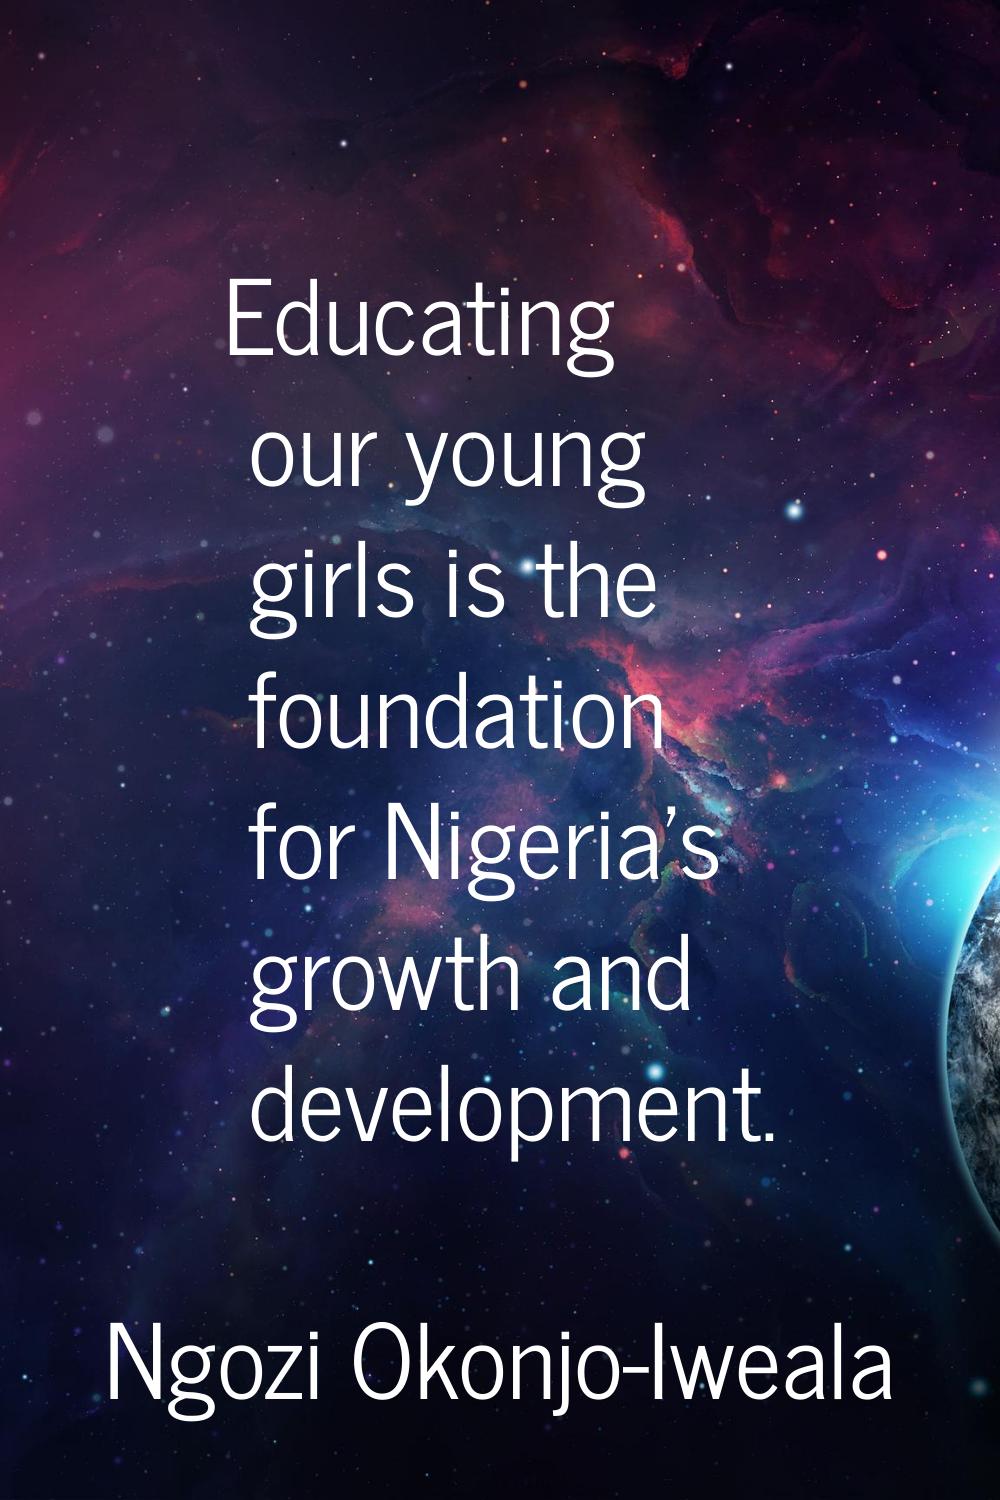 Educating our young girls is the foundation for Nigeria's growth and development.